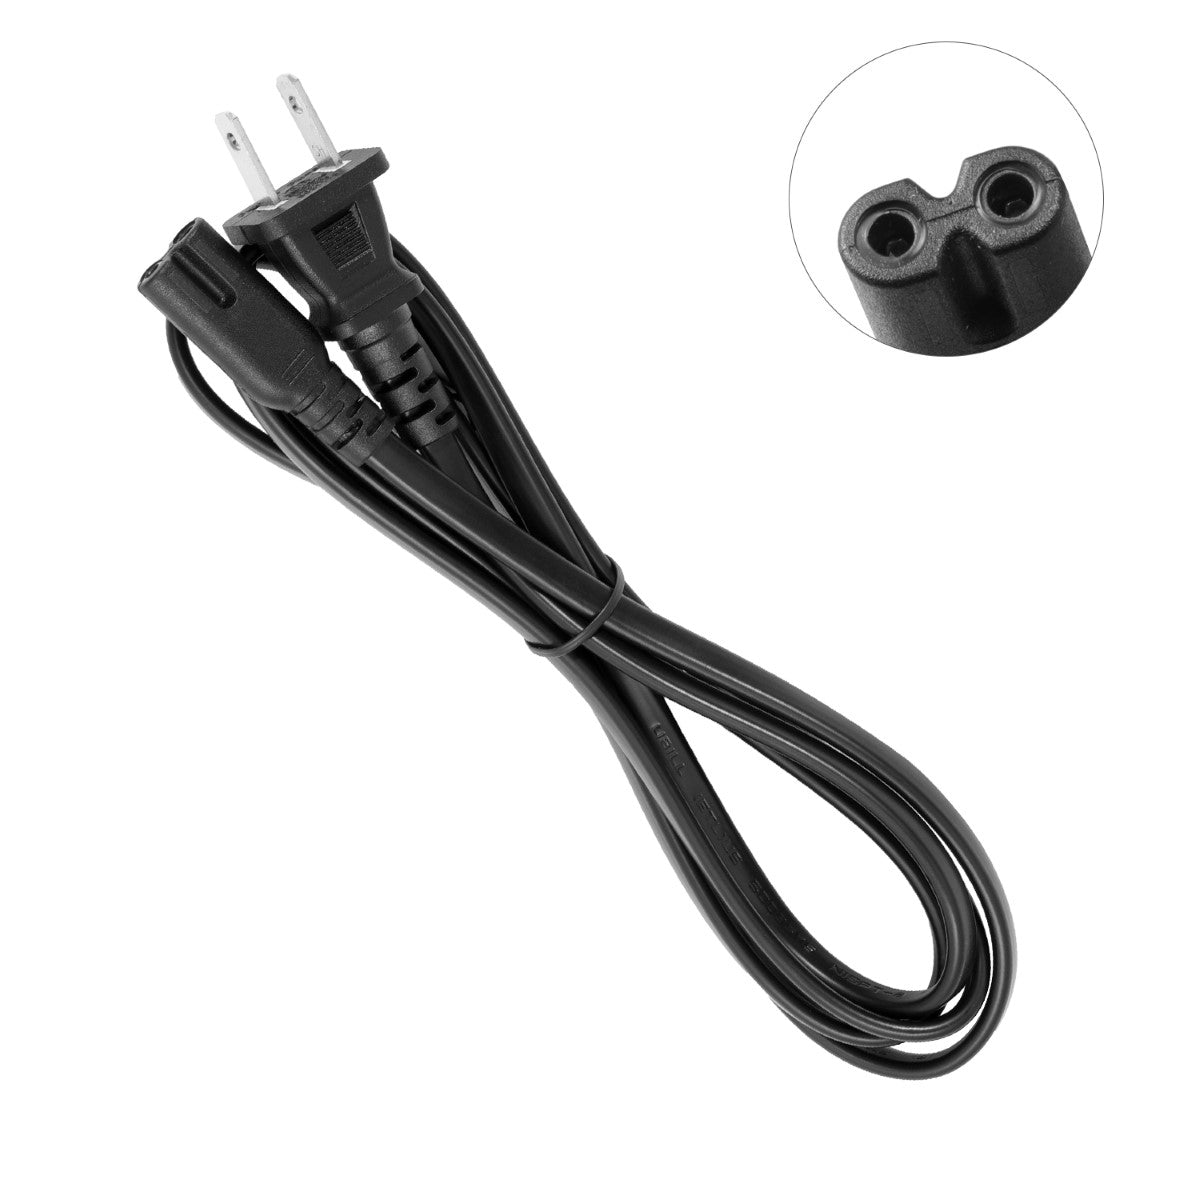 Power Cable for Canon PIXMA MG2522 Printer.